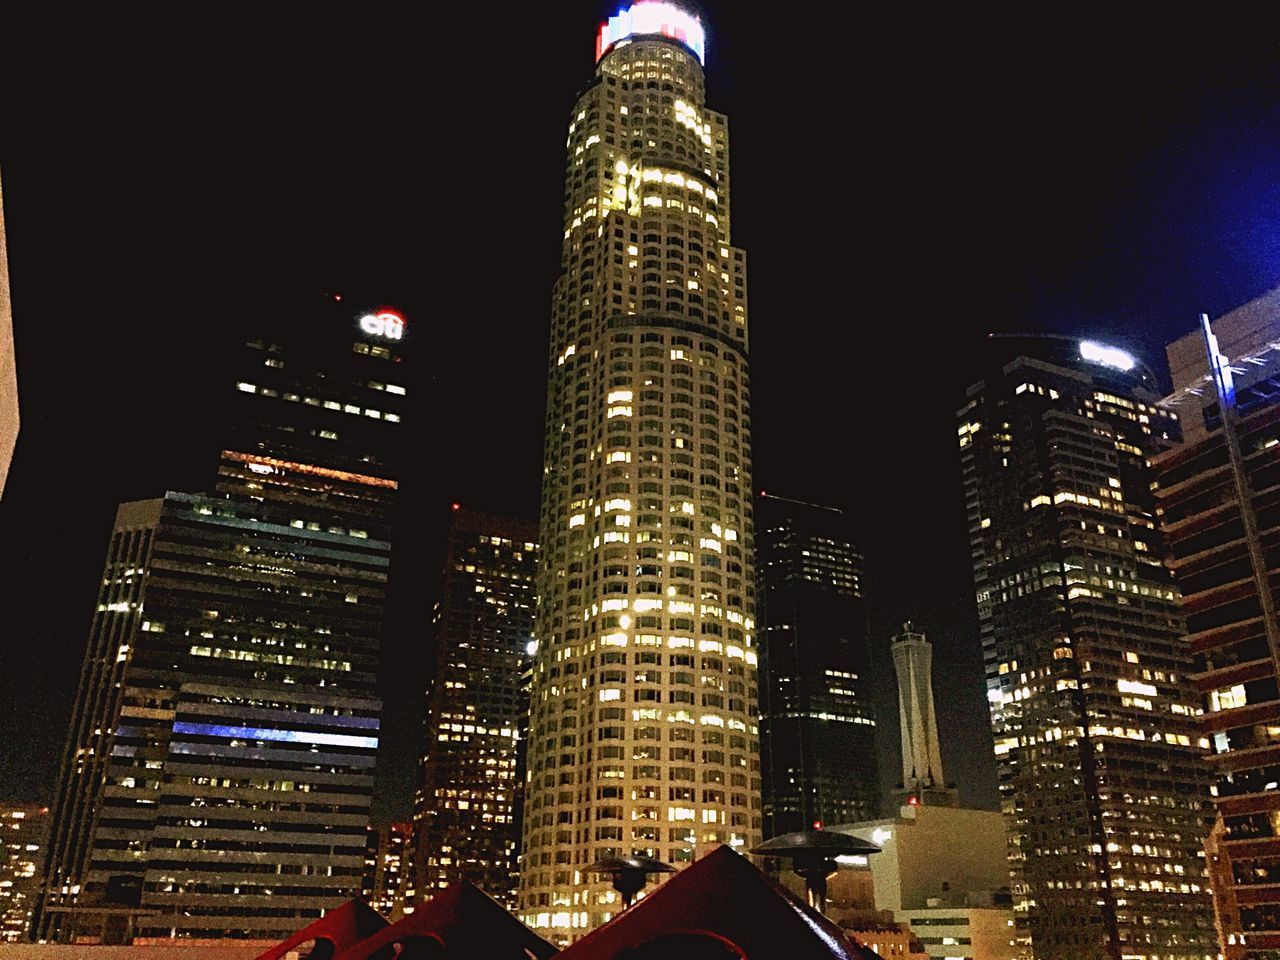 LOW ANGLE VIEW OF ILLUMINATED SKYSCRAPERS IN CITY